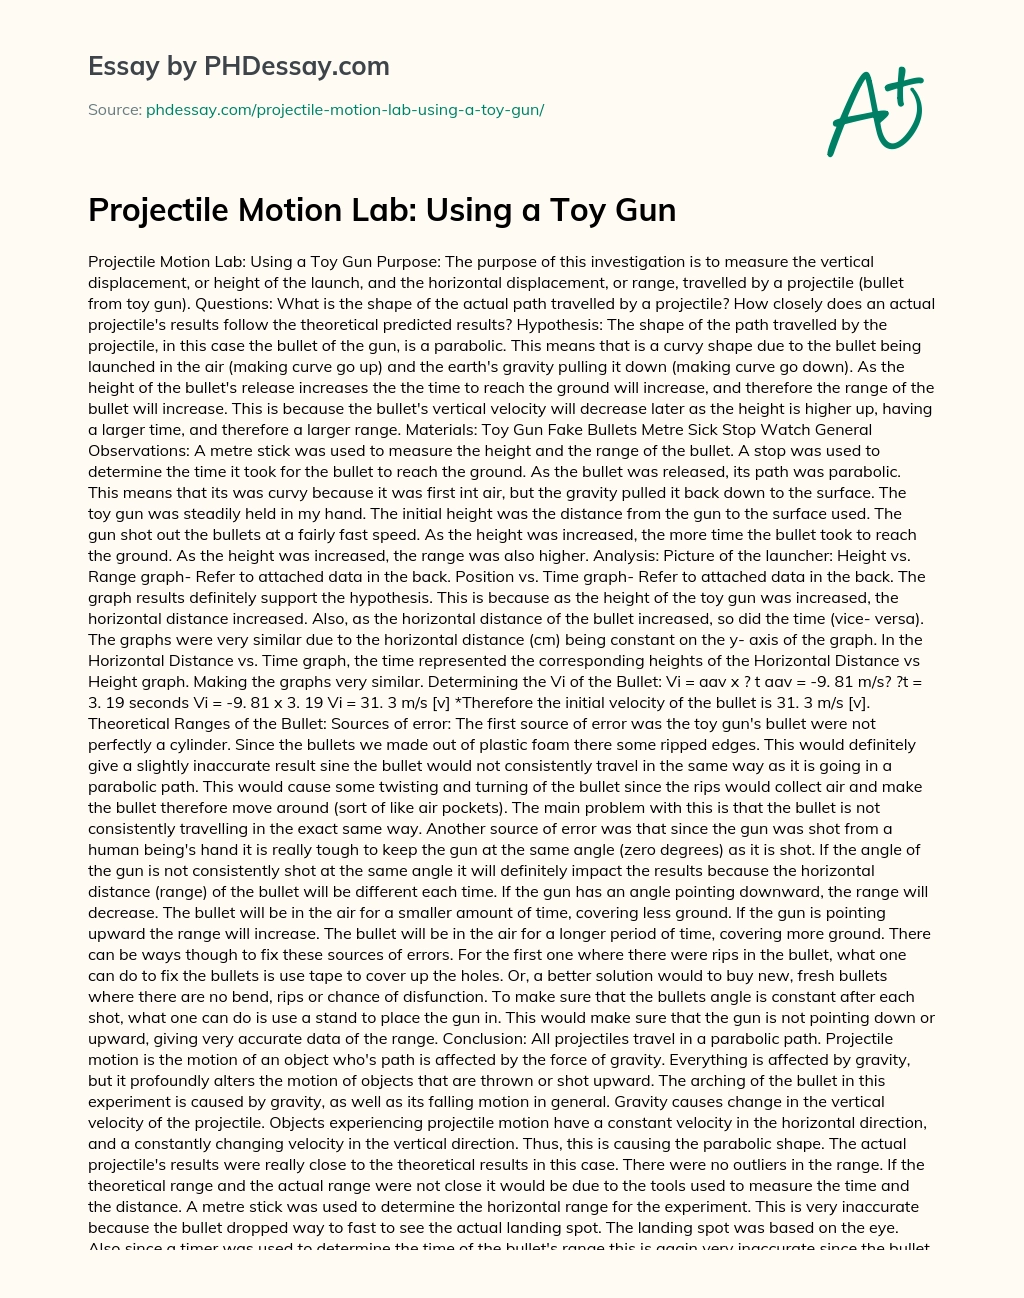 Projectile Motion Lab: Using a Toy Gun essay